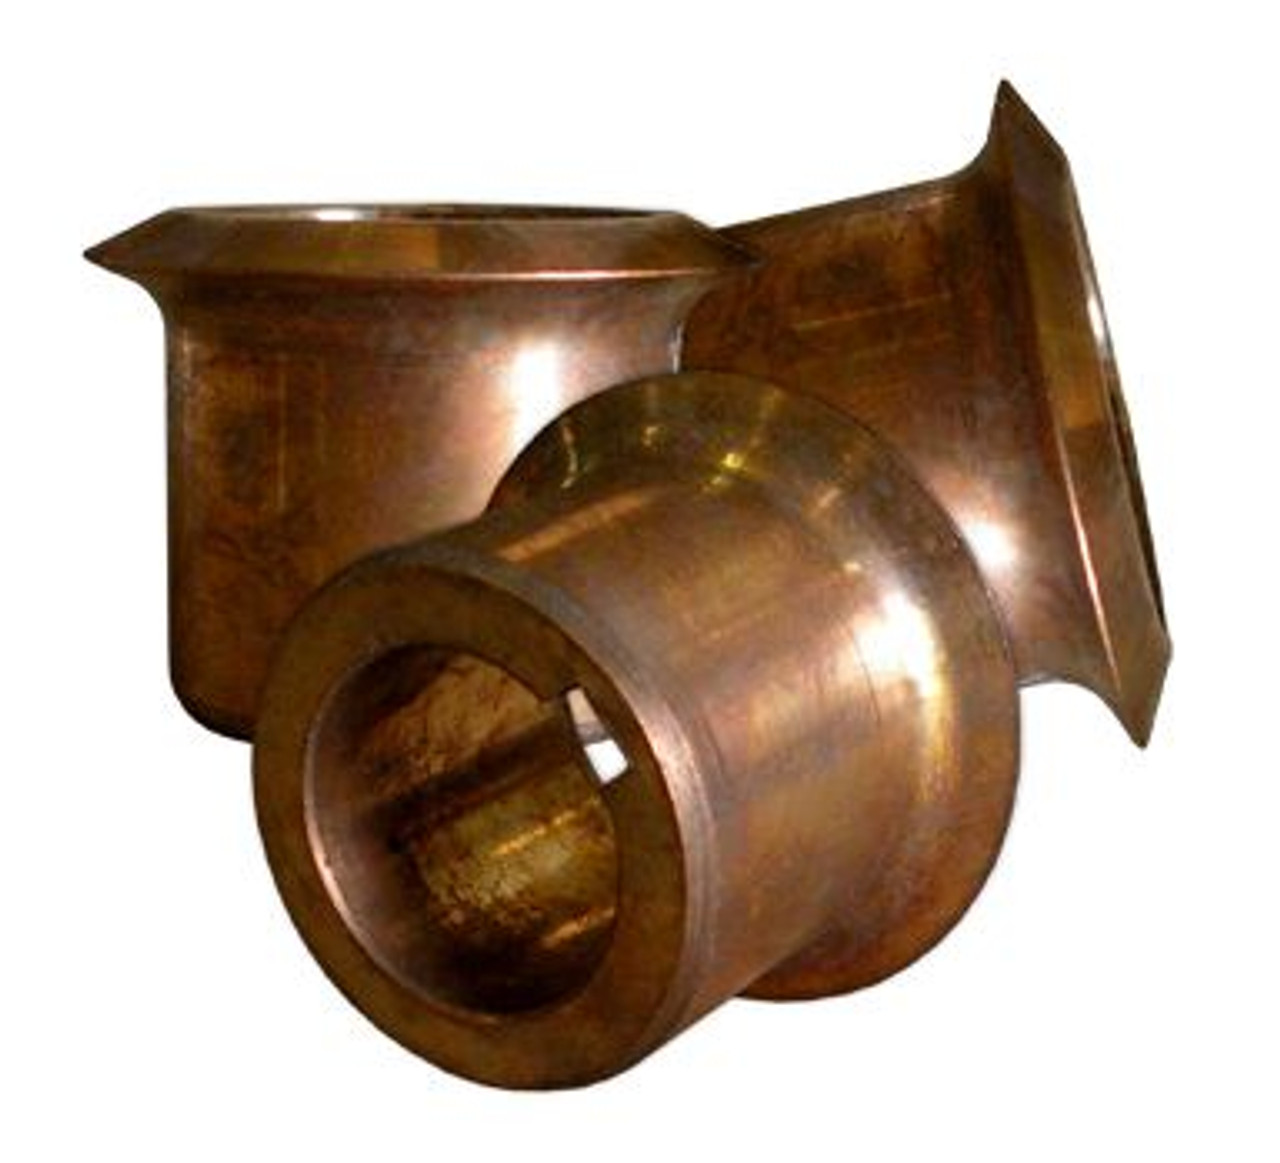 NON FERROUS REPLACEMENT CUTTING WHEEL FOR BELOW CHIME CUT ON WIZARD® POWER DRUM DEHEADER